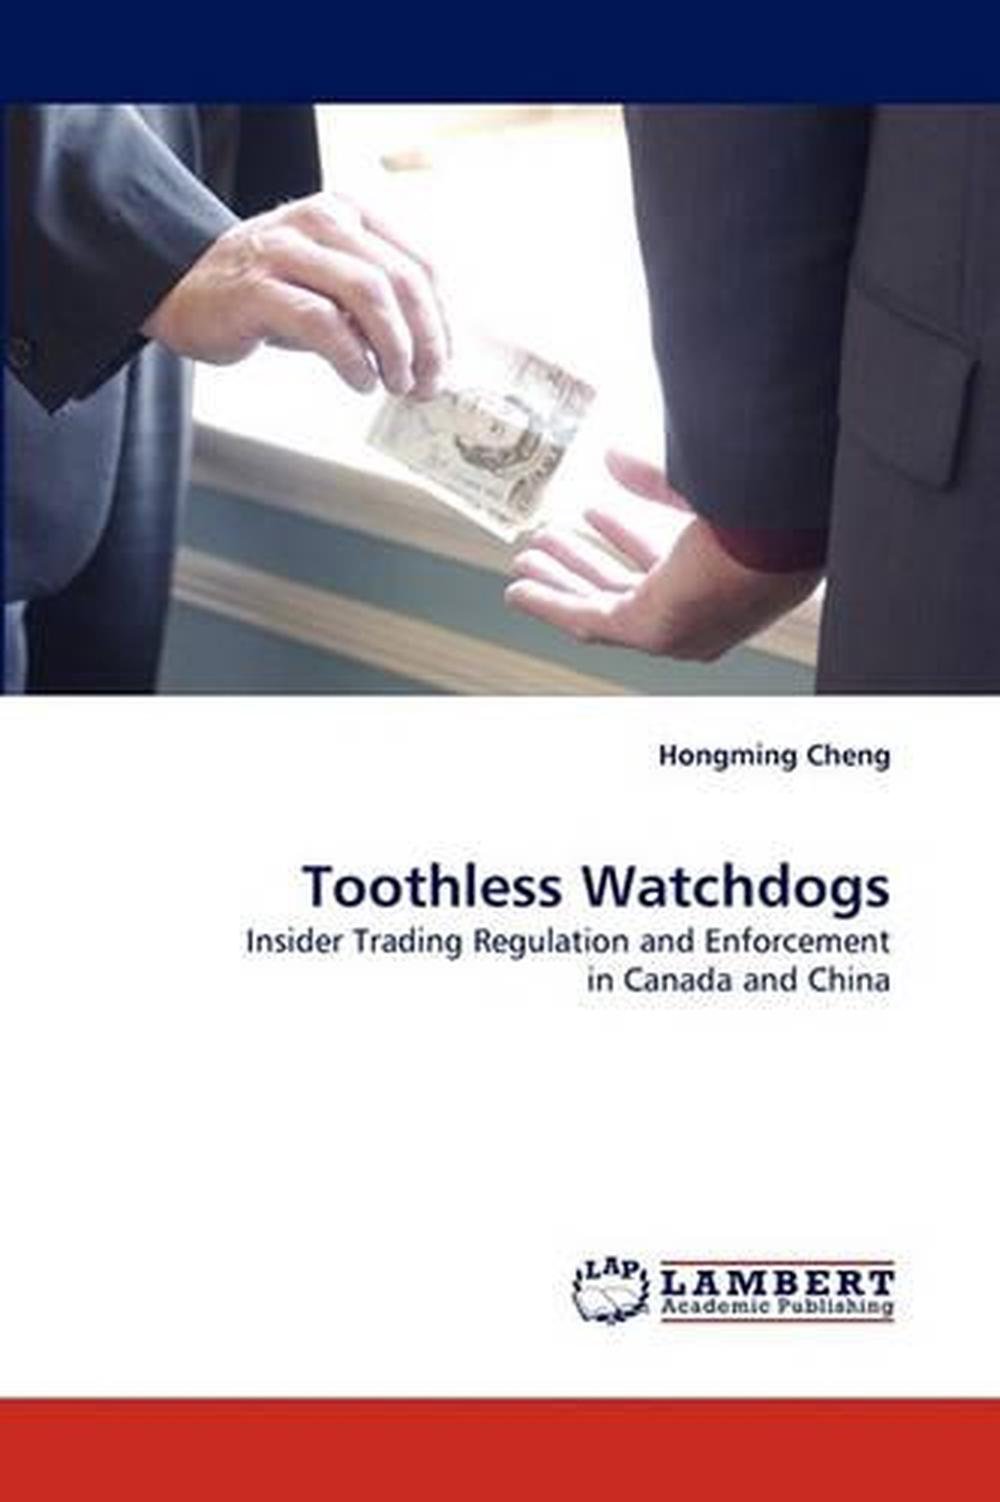 government watchdogs canada